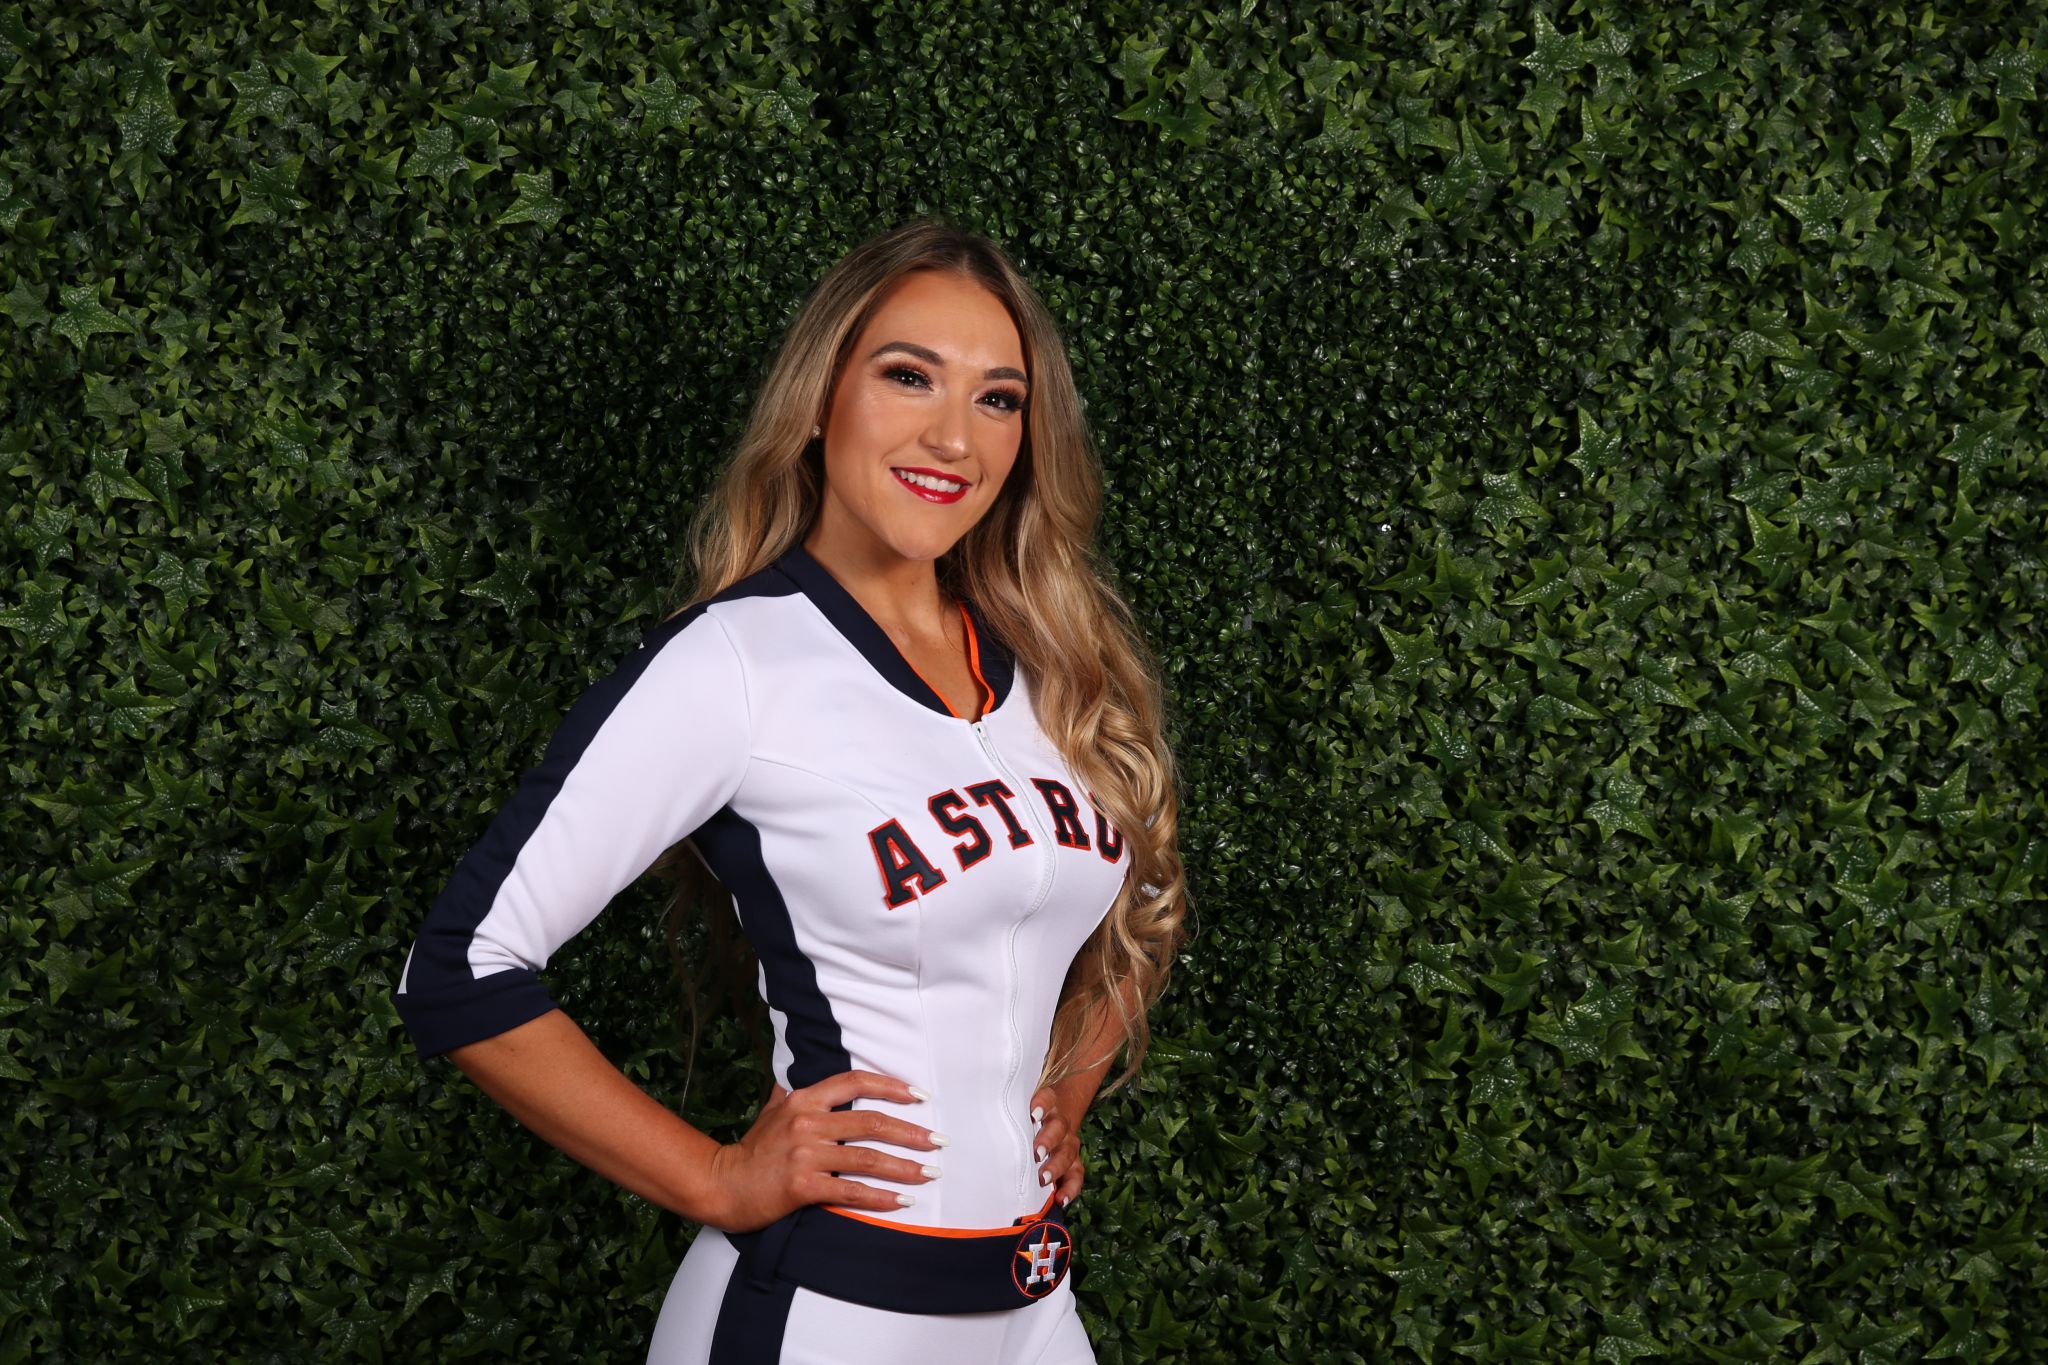 Houston Astros - The #Astros Shooting Stars will make an